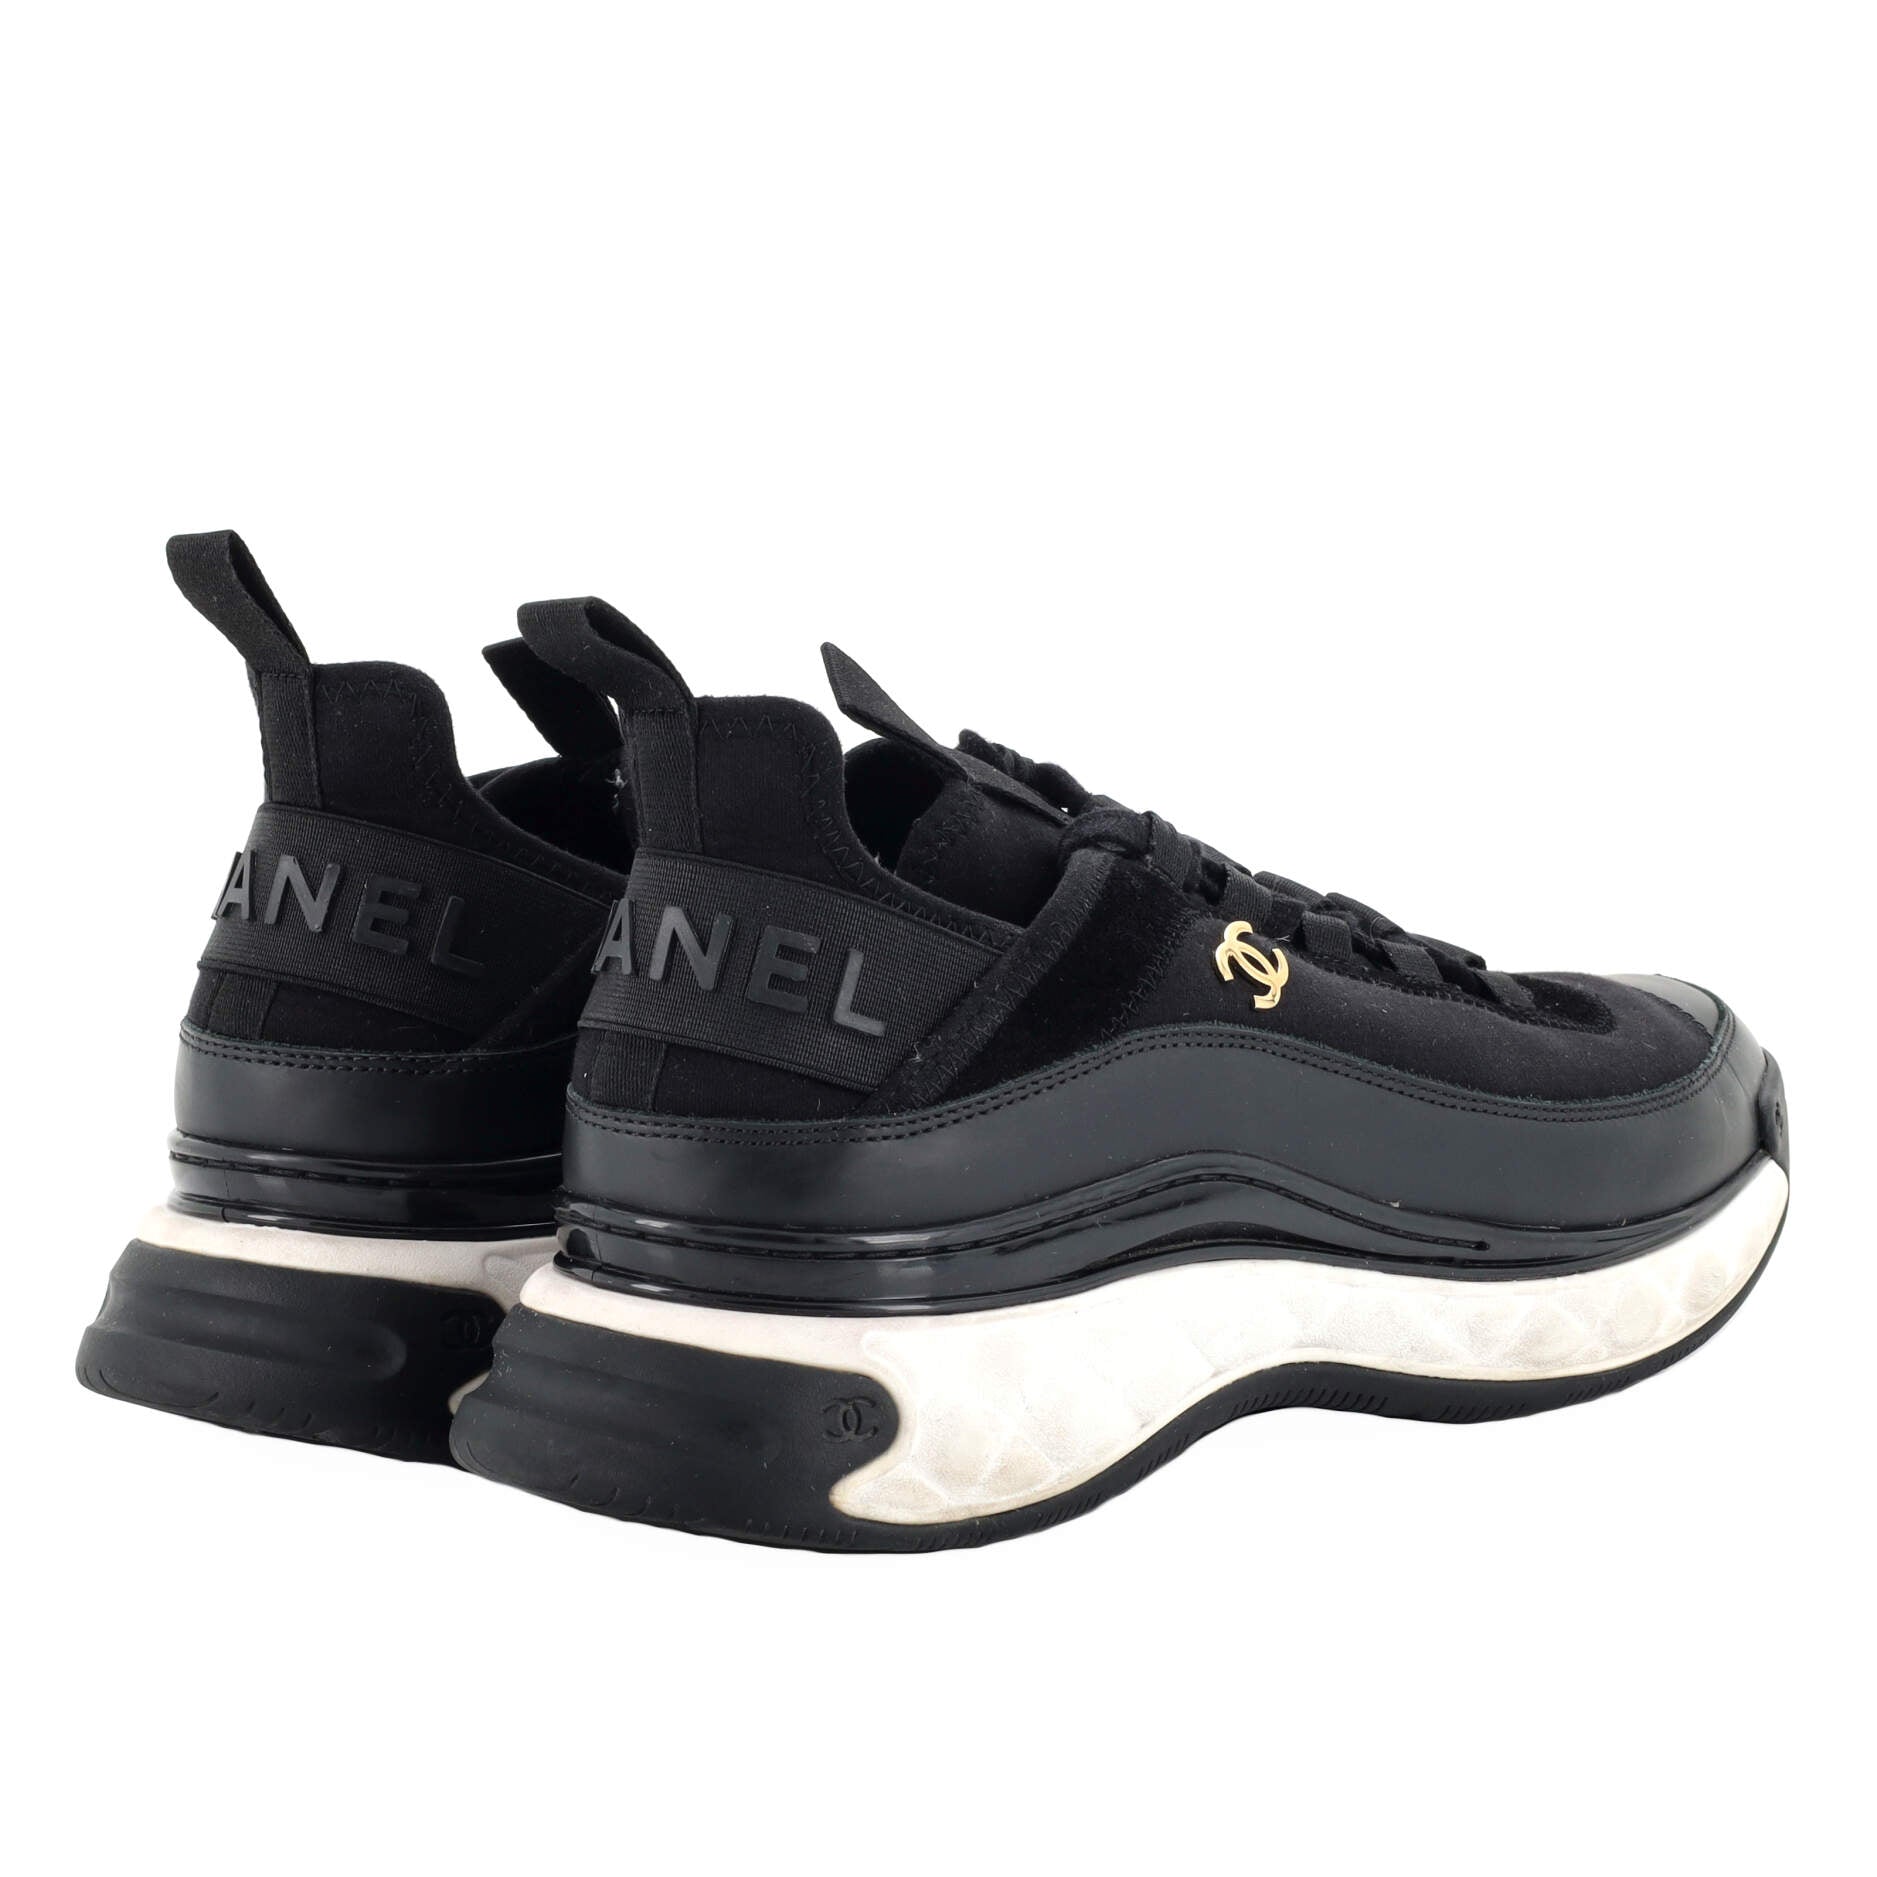 CHANEL Women's CC Sneakers Fabric and Leather